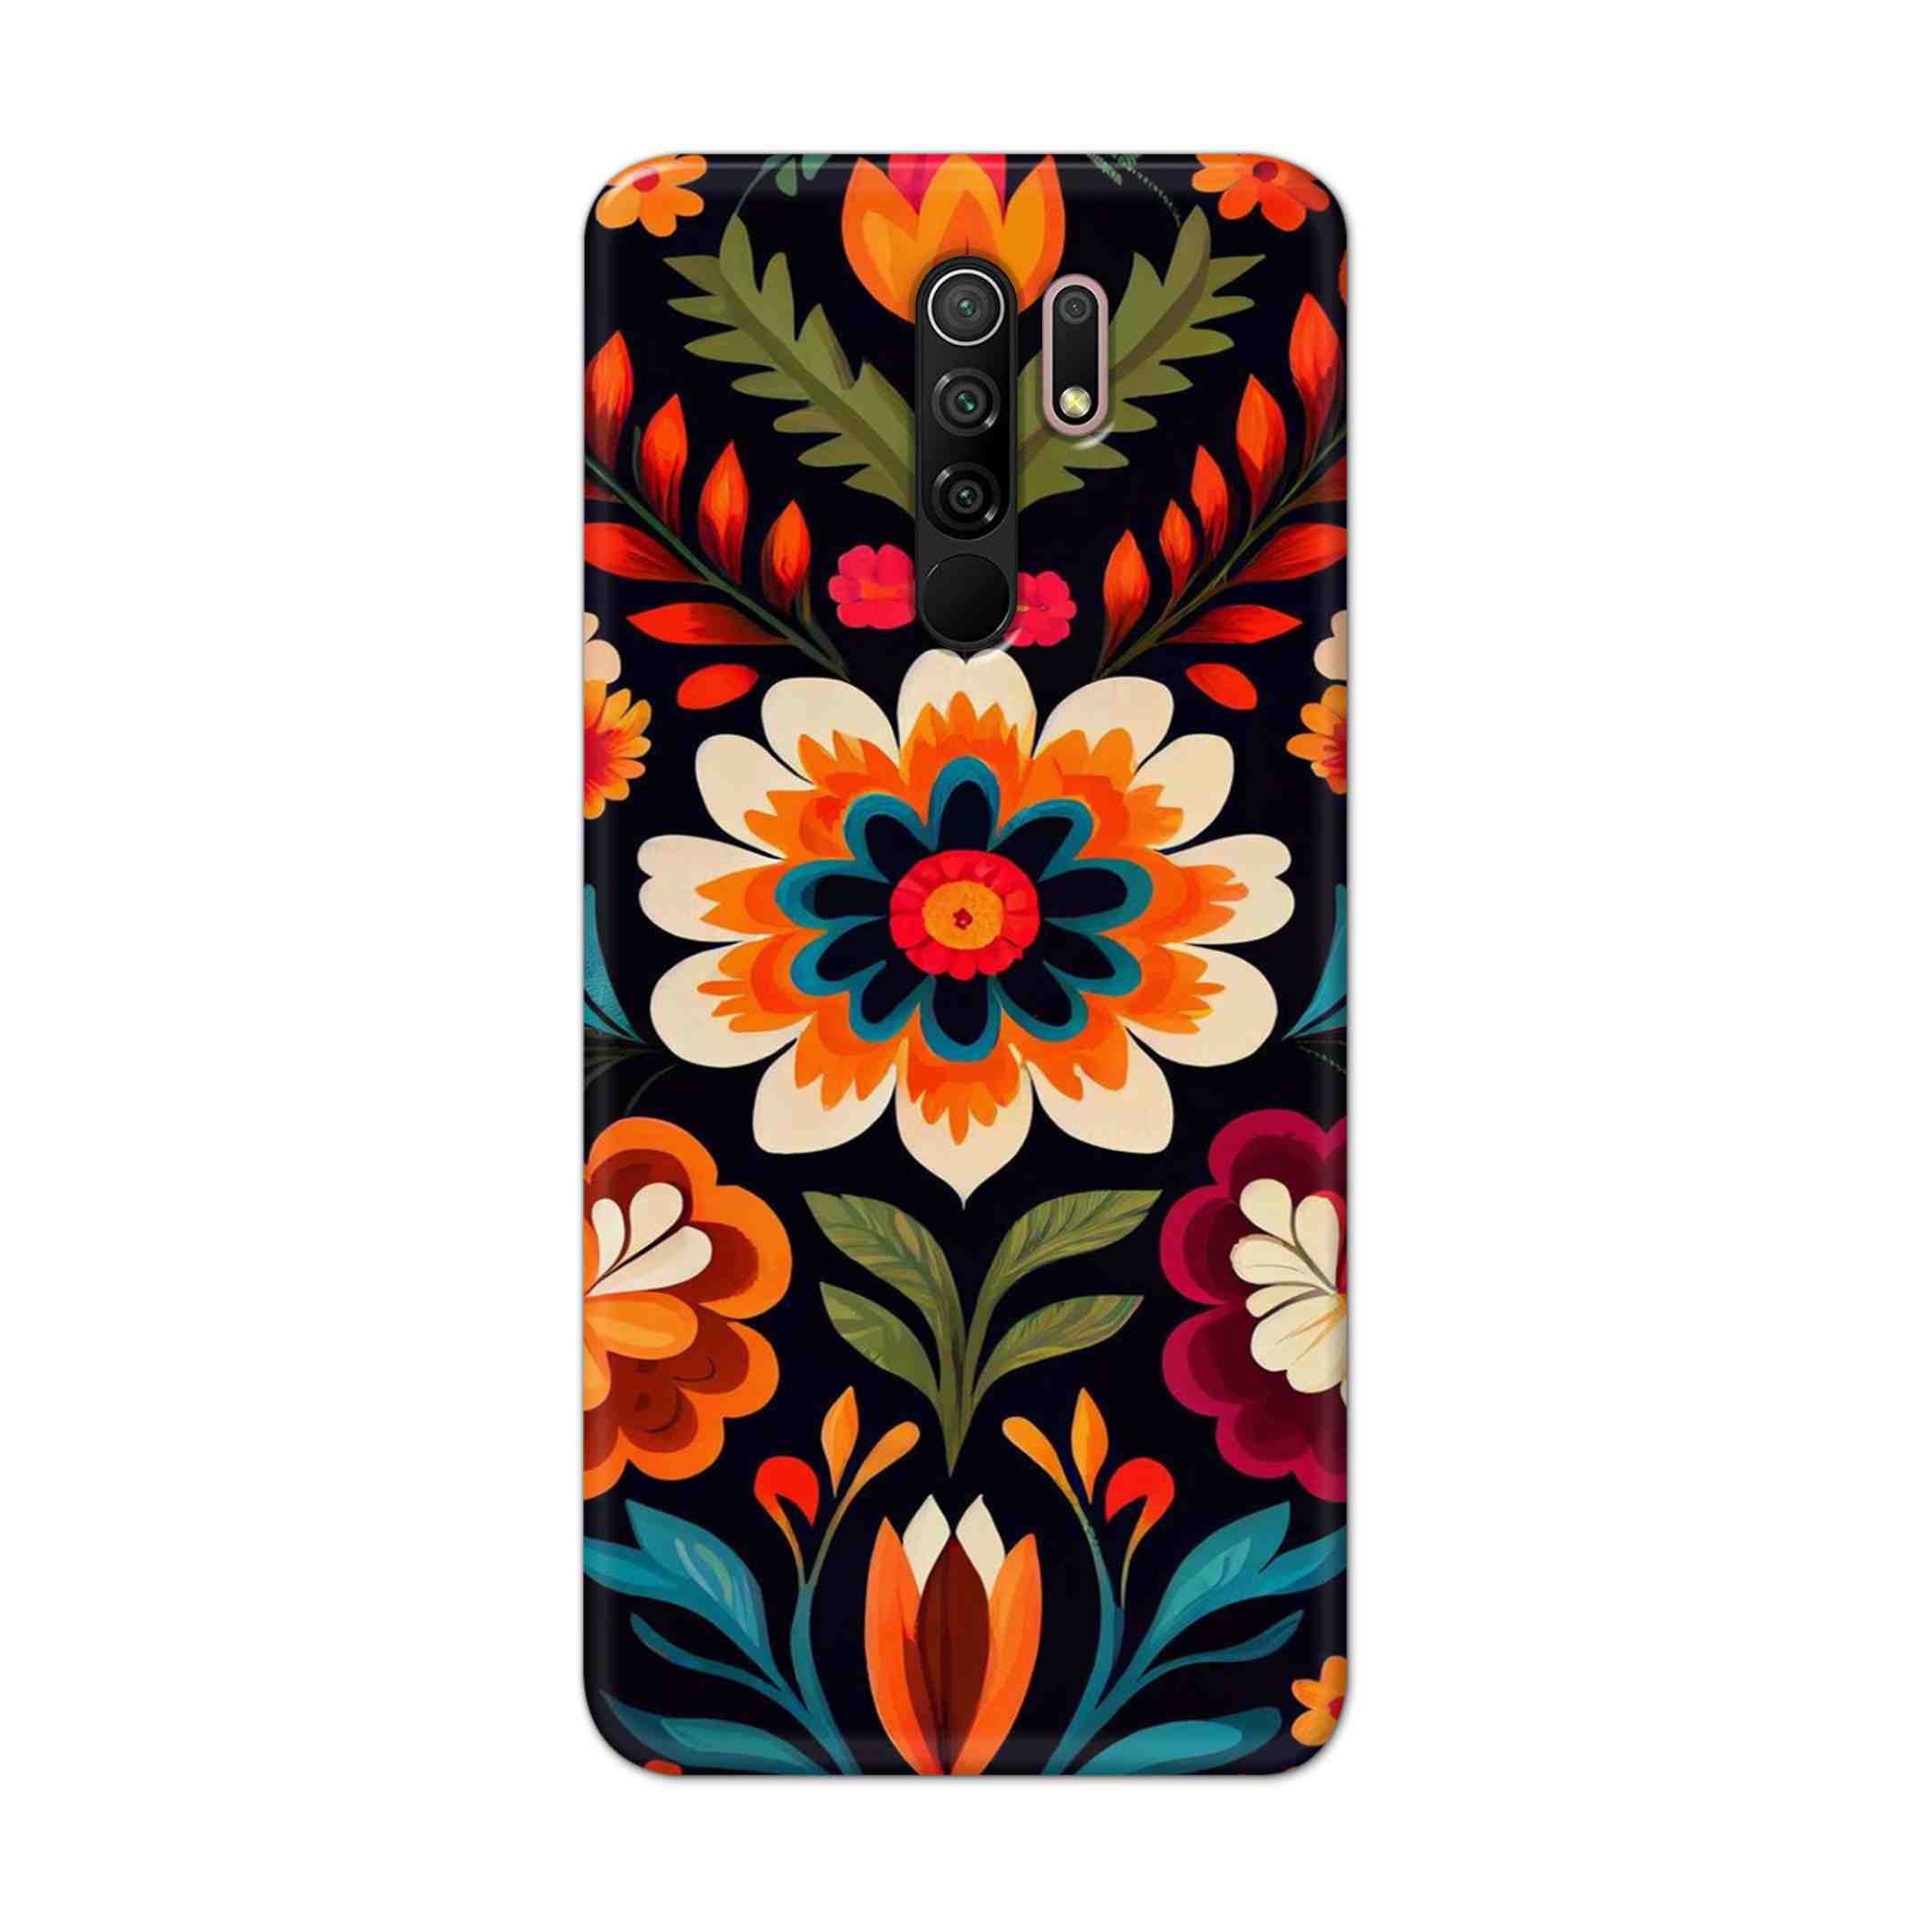 Buy Flower Hard Back Mobile Phone Case Cover For Xiaomi Redmi 9 Prime Online